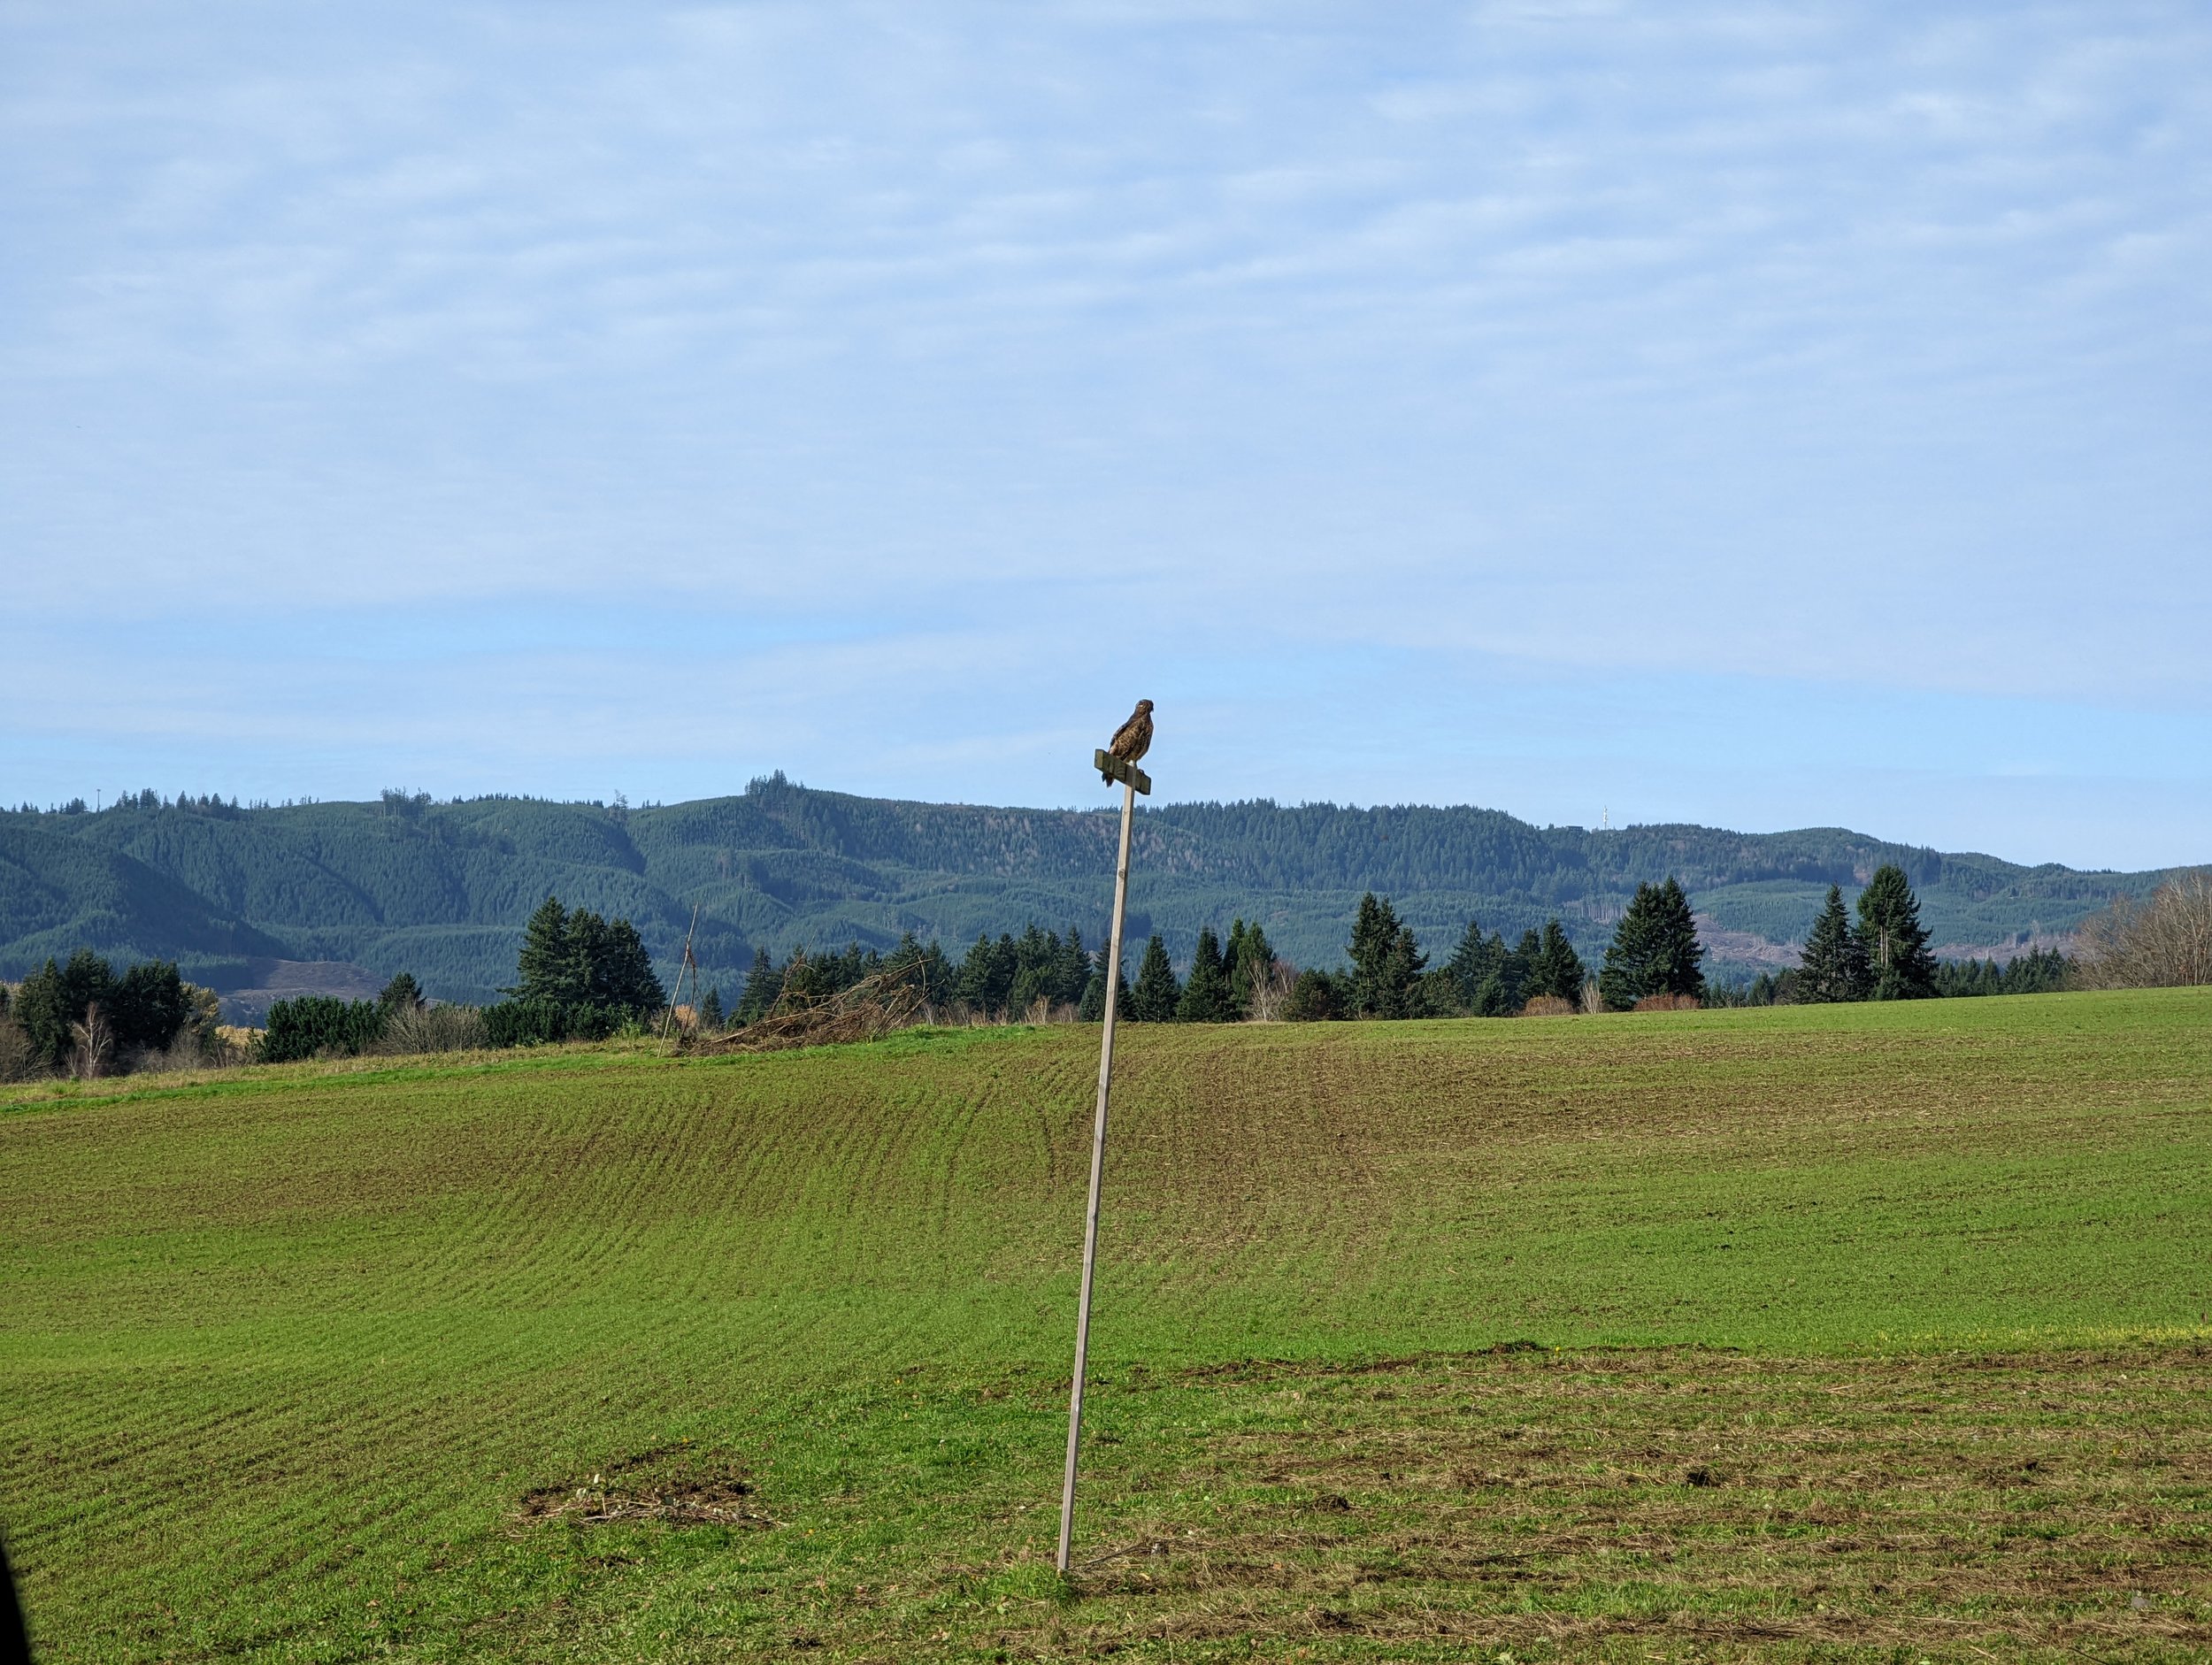  November thru March is the best time of year to see all the birds of prey and Sandhill Cranes. We just built two dozen more hawk perches to put in the fields, which will help reduce the rodent population on the farm. 